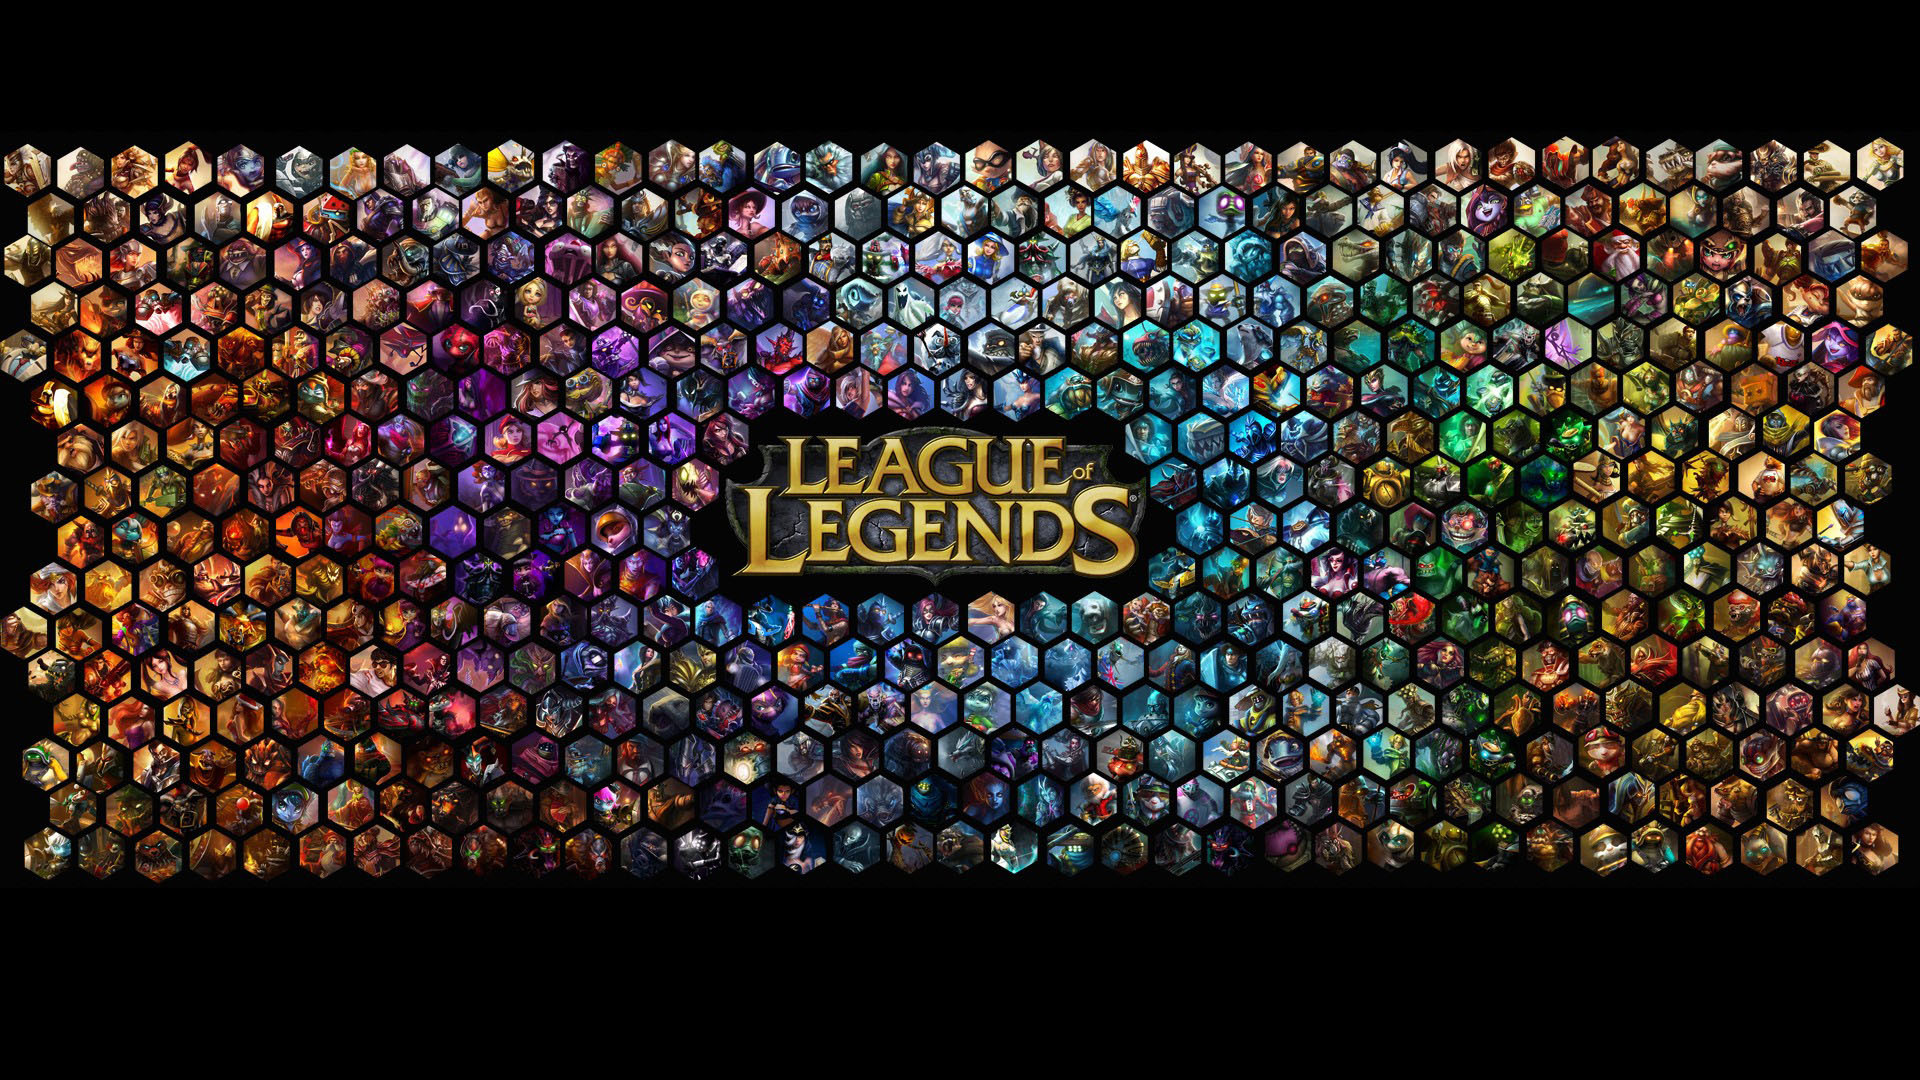 1920x1080 Slayers Skins League Of Legends Wallpapers HD Art of LoL - HD Wallpapers